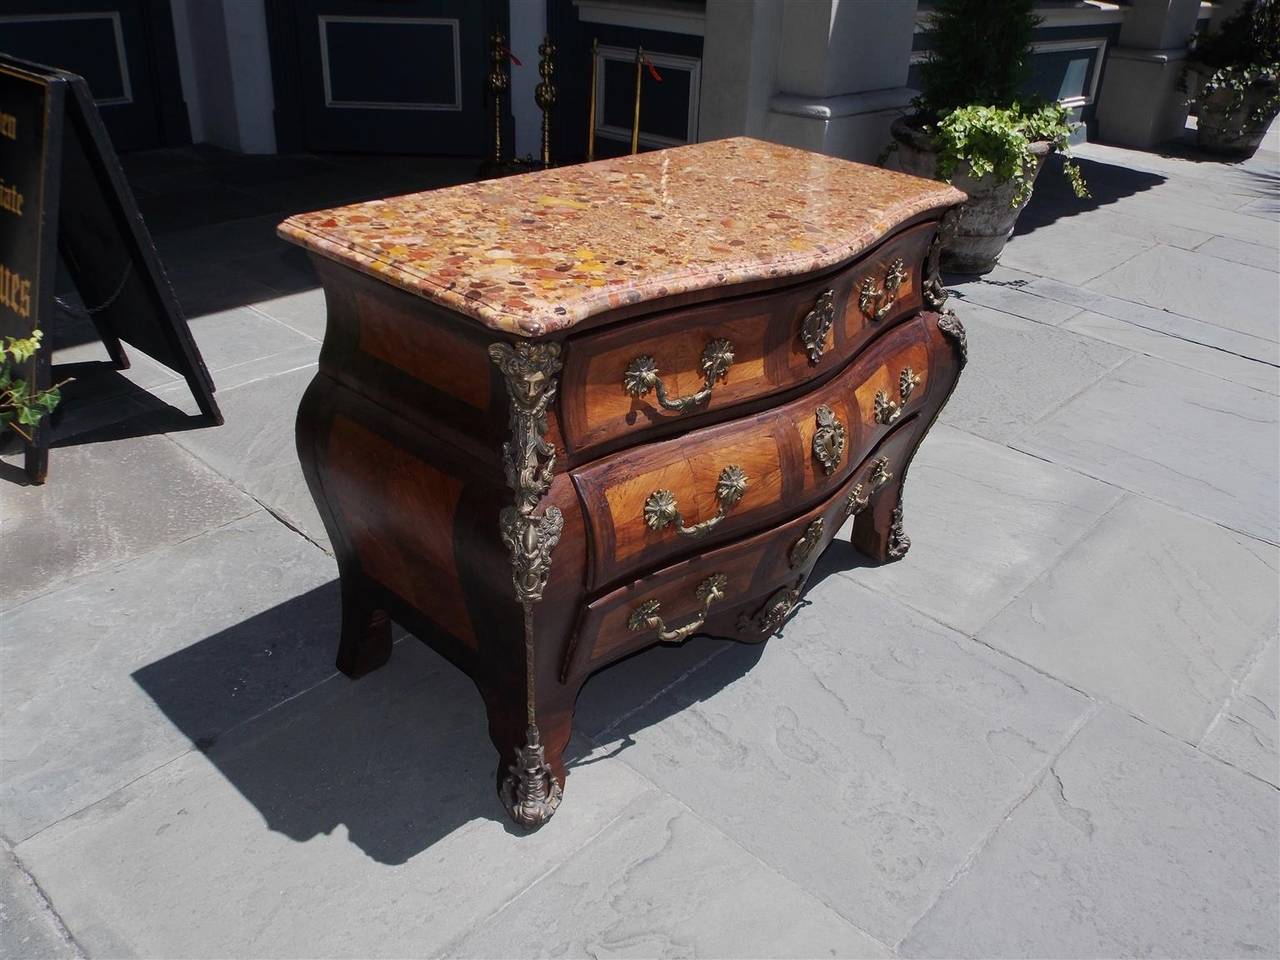 Pair of Italian Marble Top Ormolu Bombay Commodes, Circa 1870 In Excellent Condition For Sale In Hollywood, SC